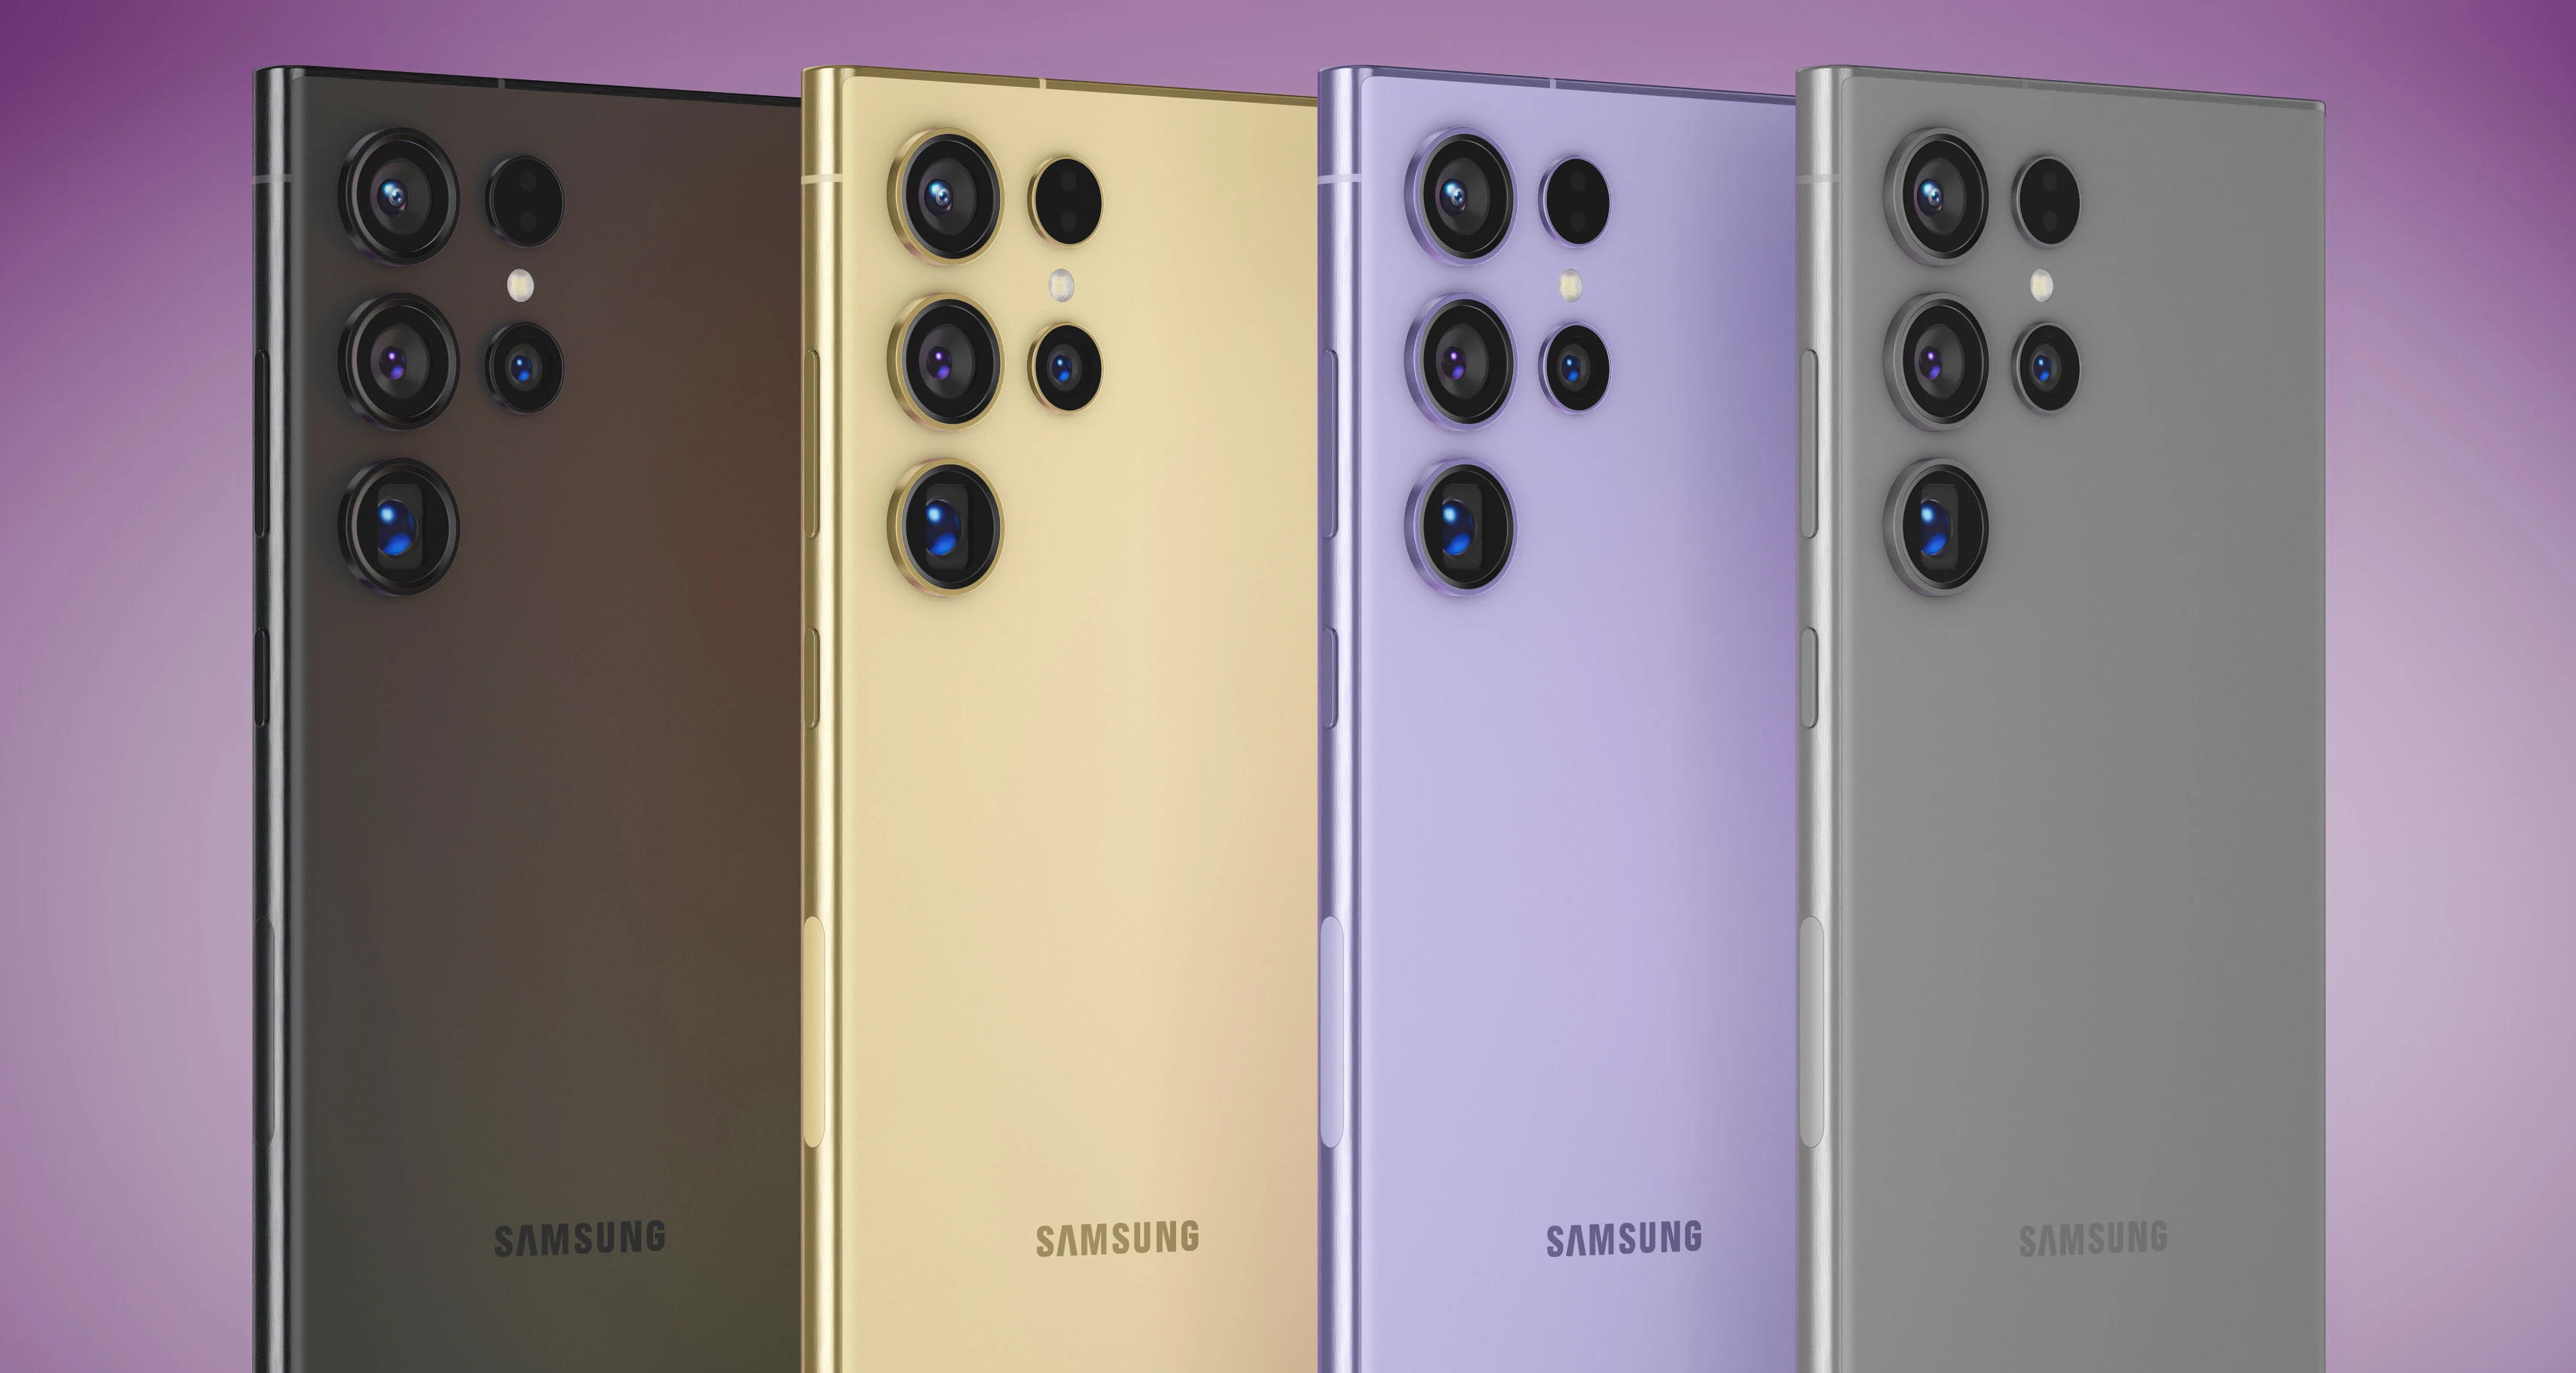 Galaxy S24 Ultra looks stunning in all seven rumored color options